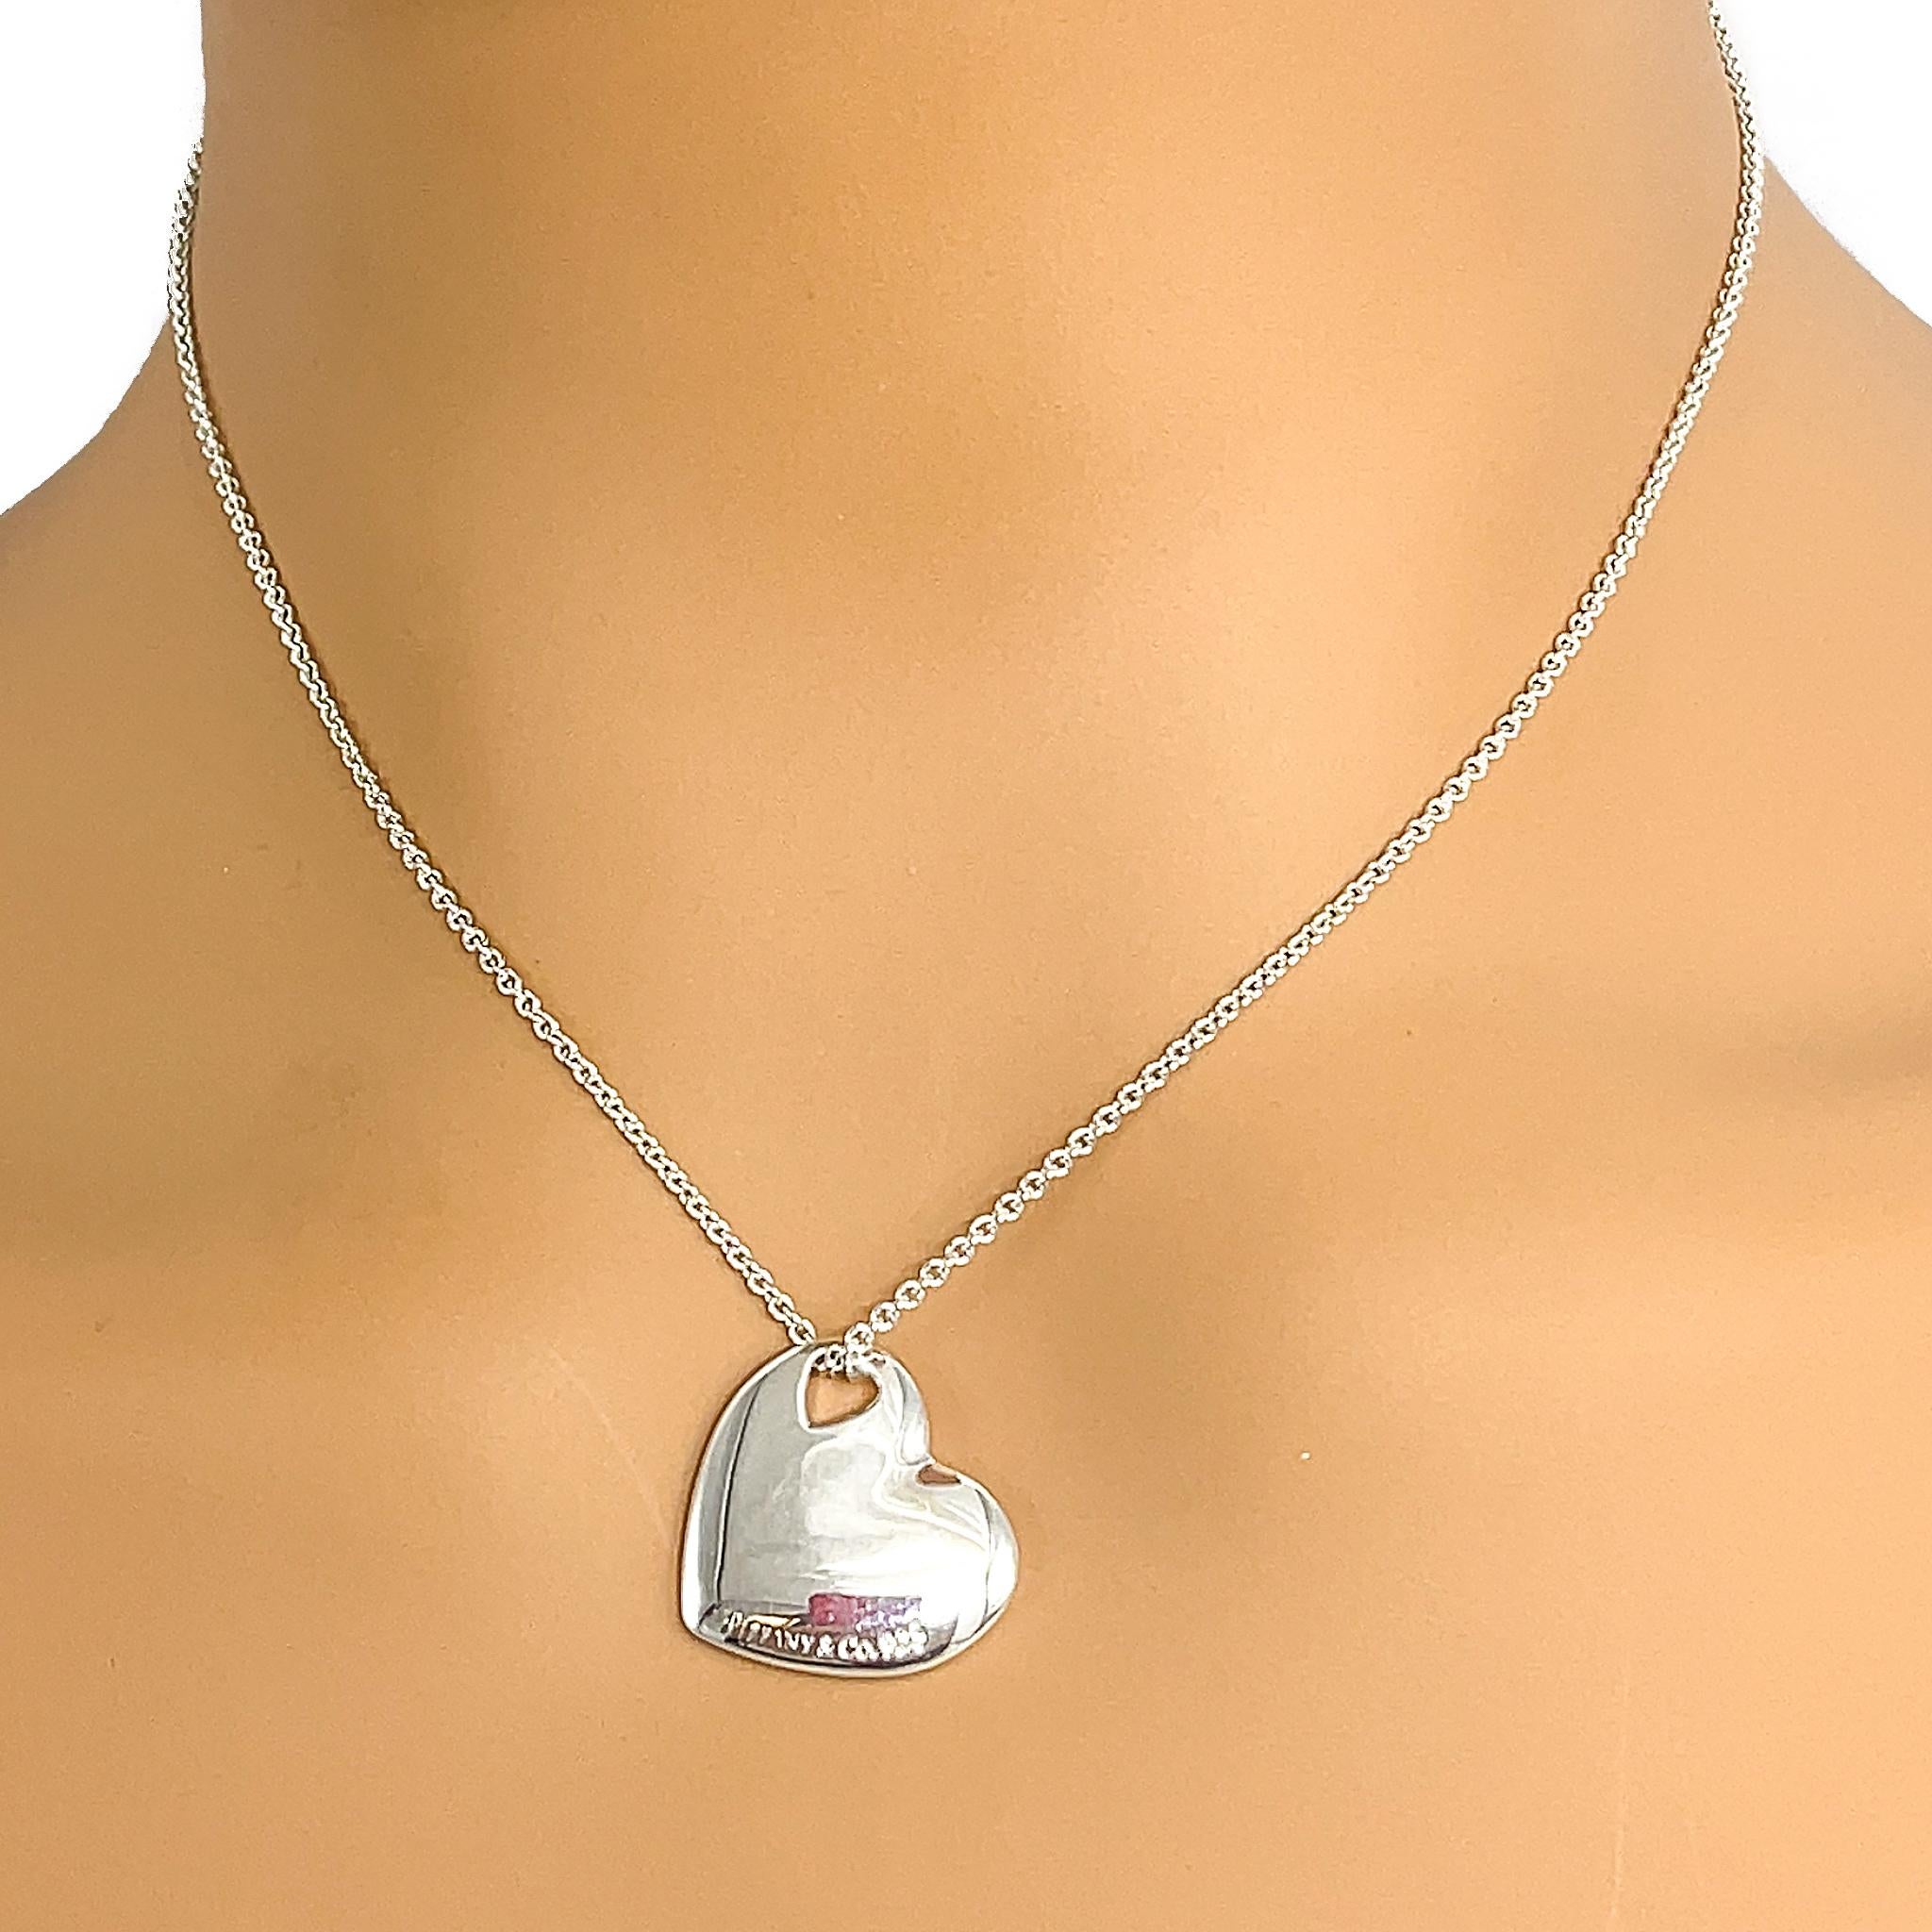 Tiffany and Co. Sterling Silver Cutout Heart Pendant Necklace 4